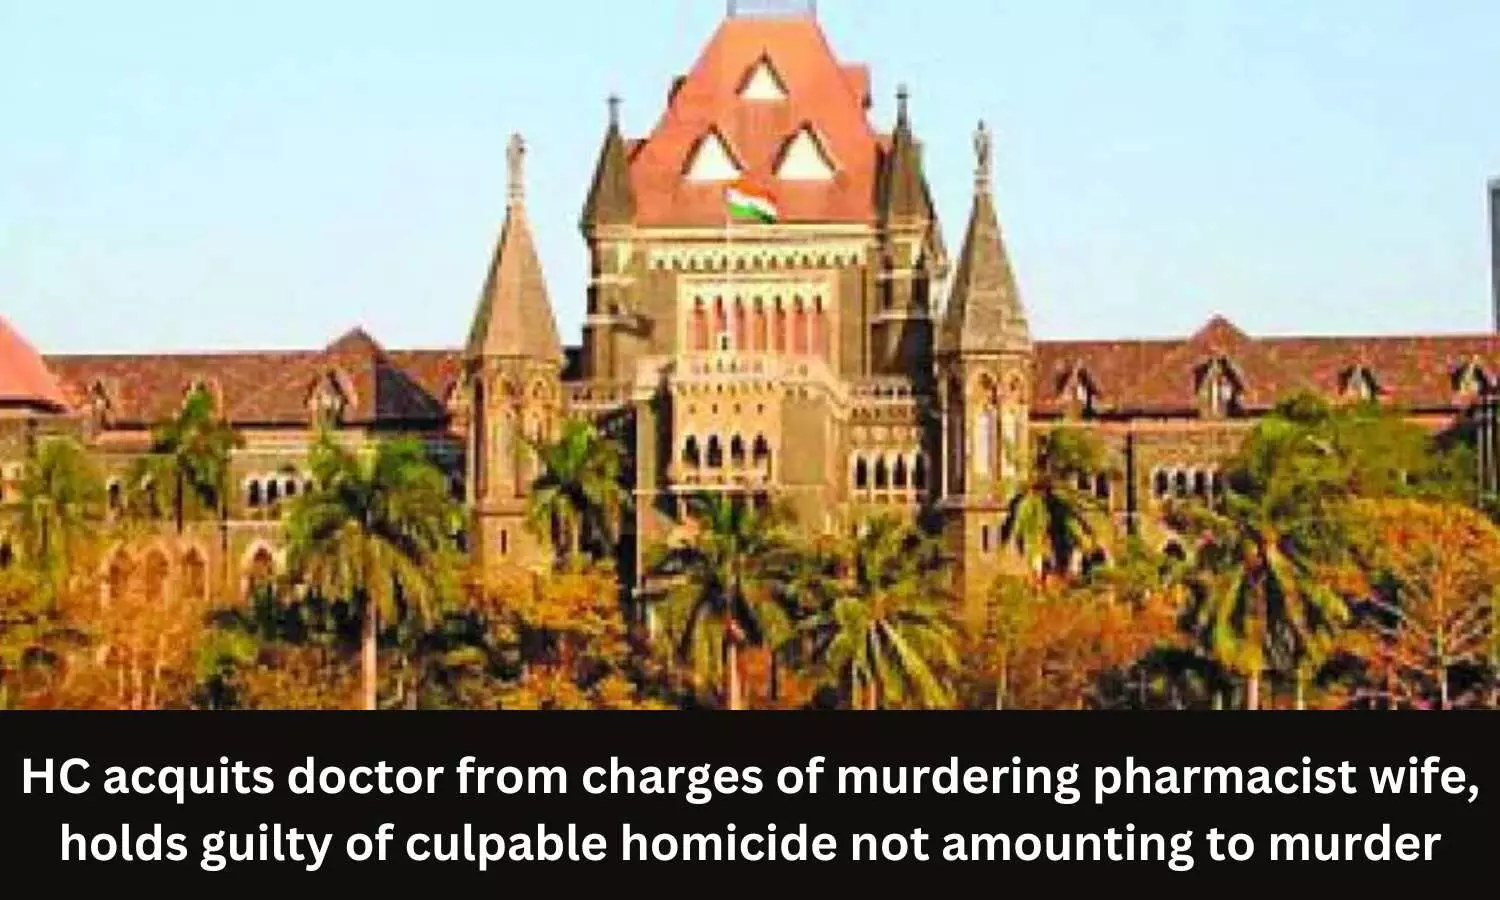 HC acquits doctor from charges of murdering pharmacist wife, holds guilty of culpable homicide not amounting to murder